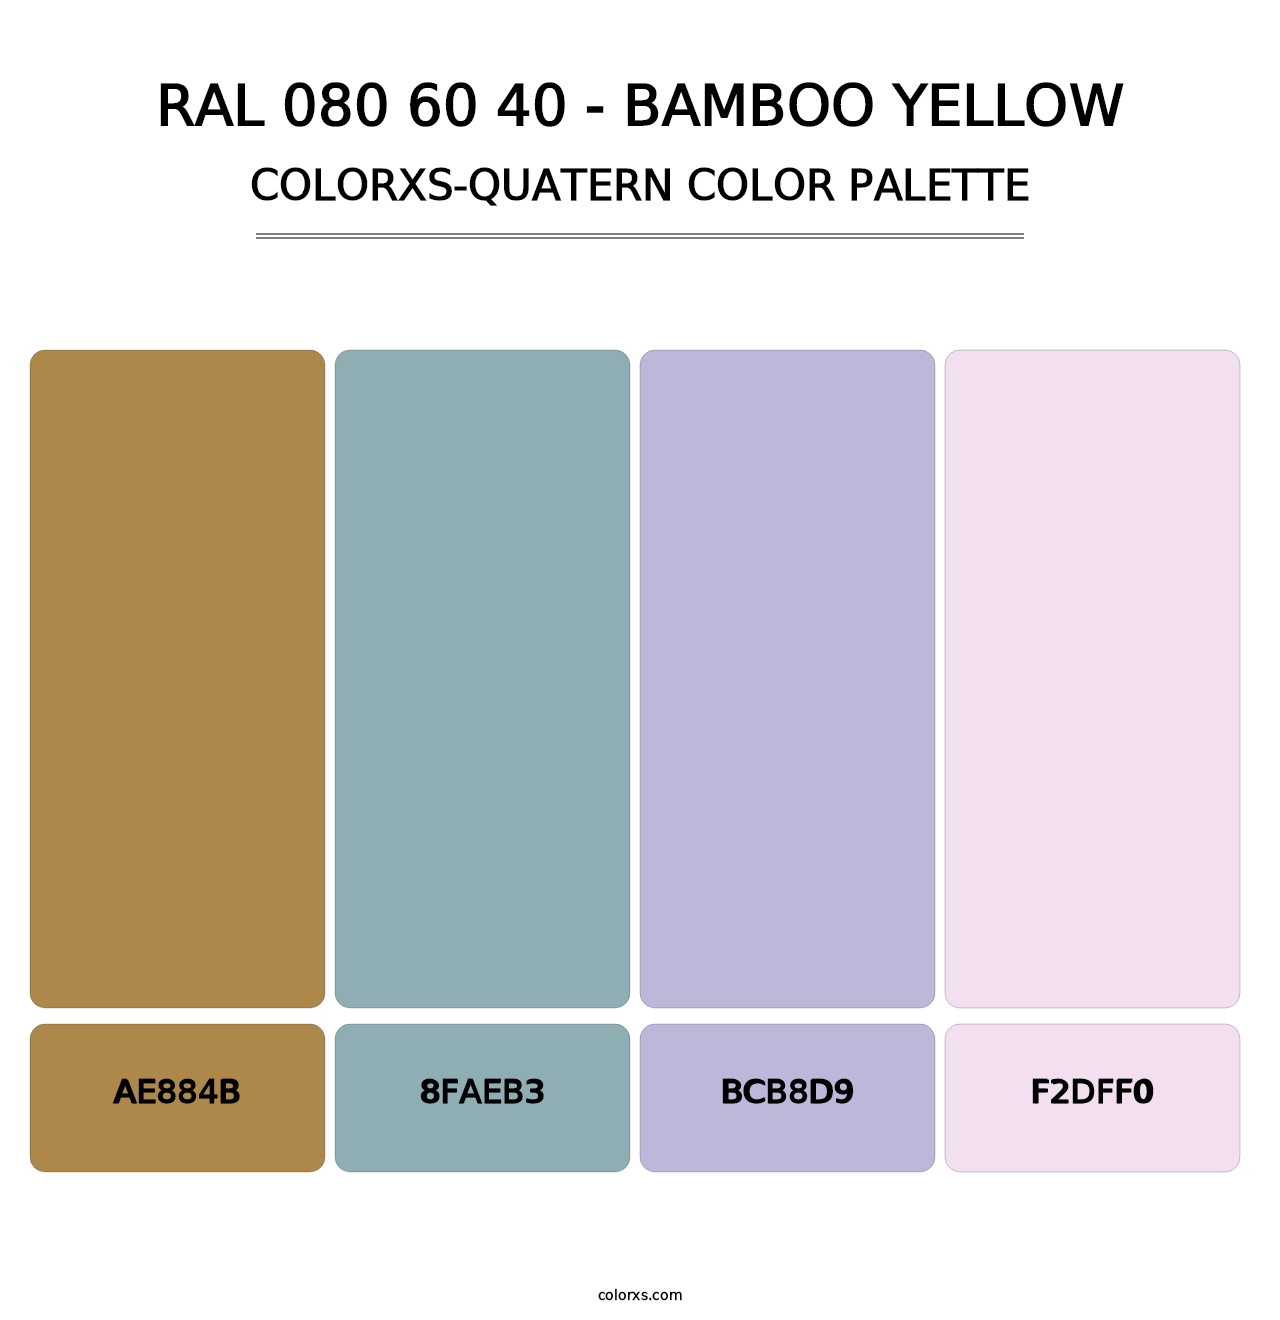 RAL 080 60 40 - Bamboo Yellow - Colorxs Quatern Palette